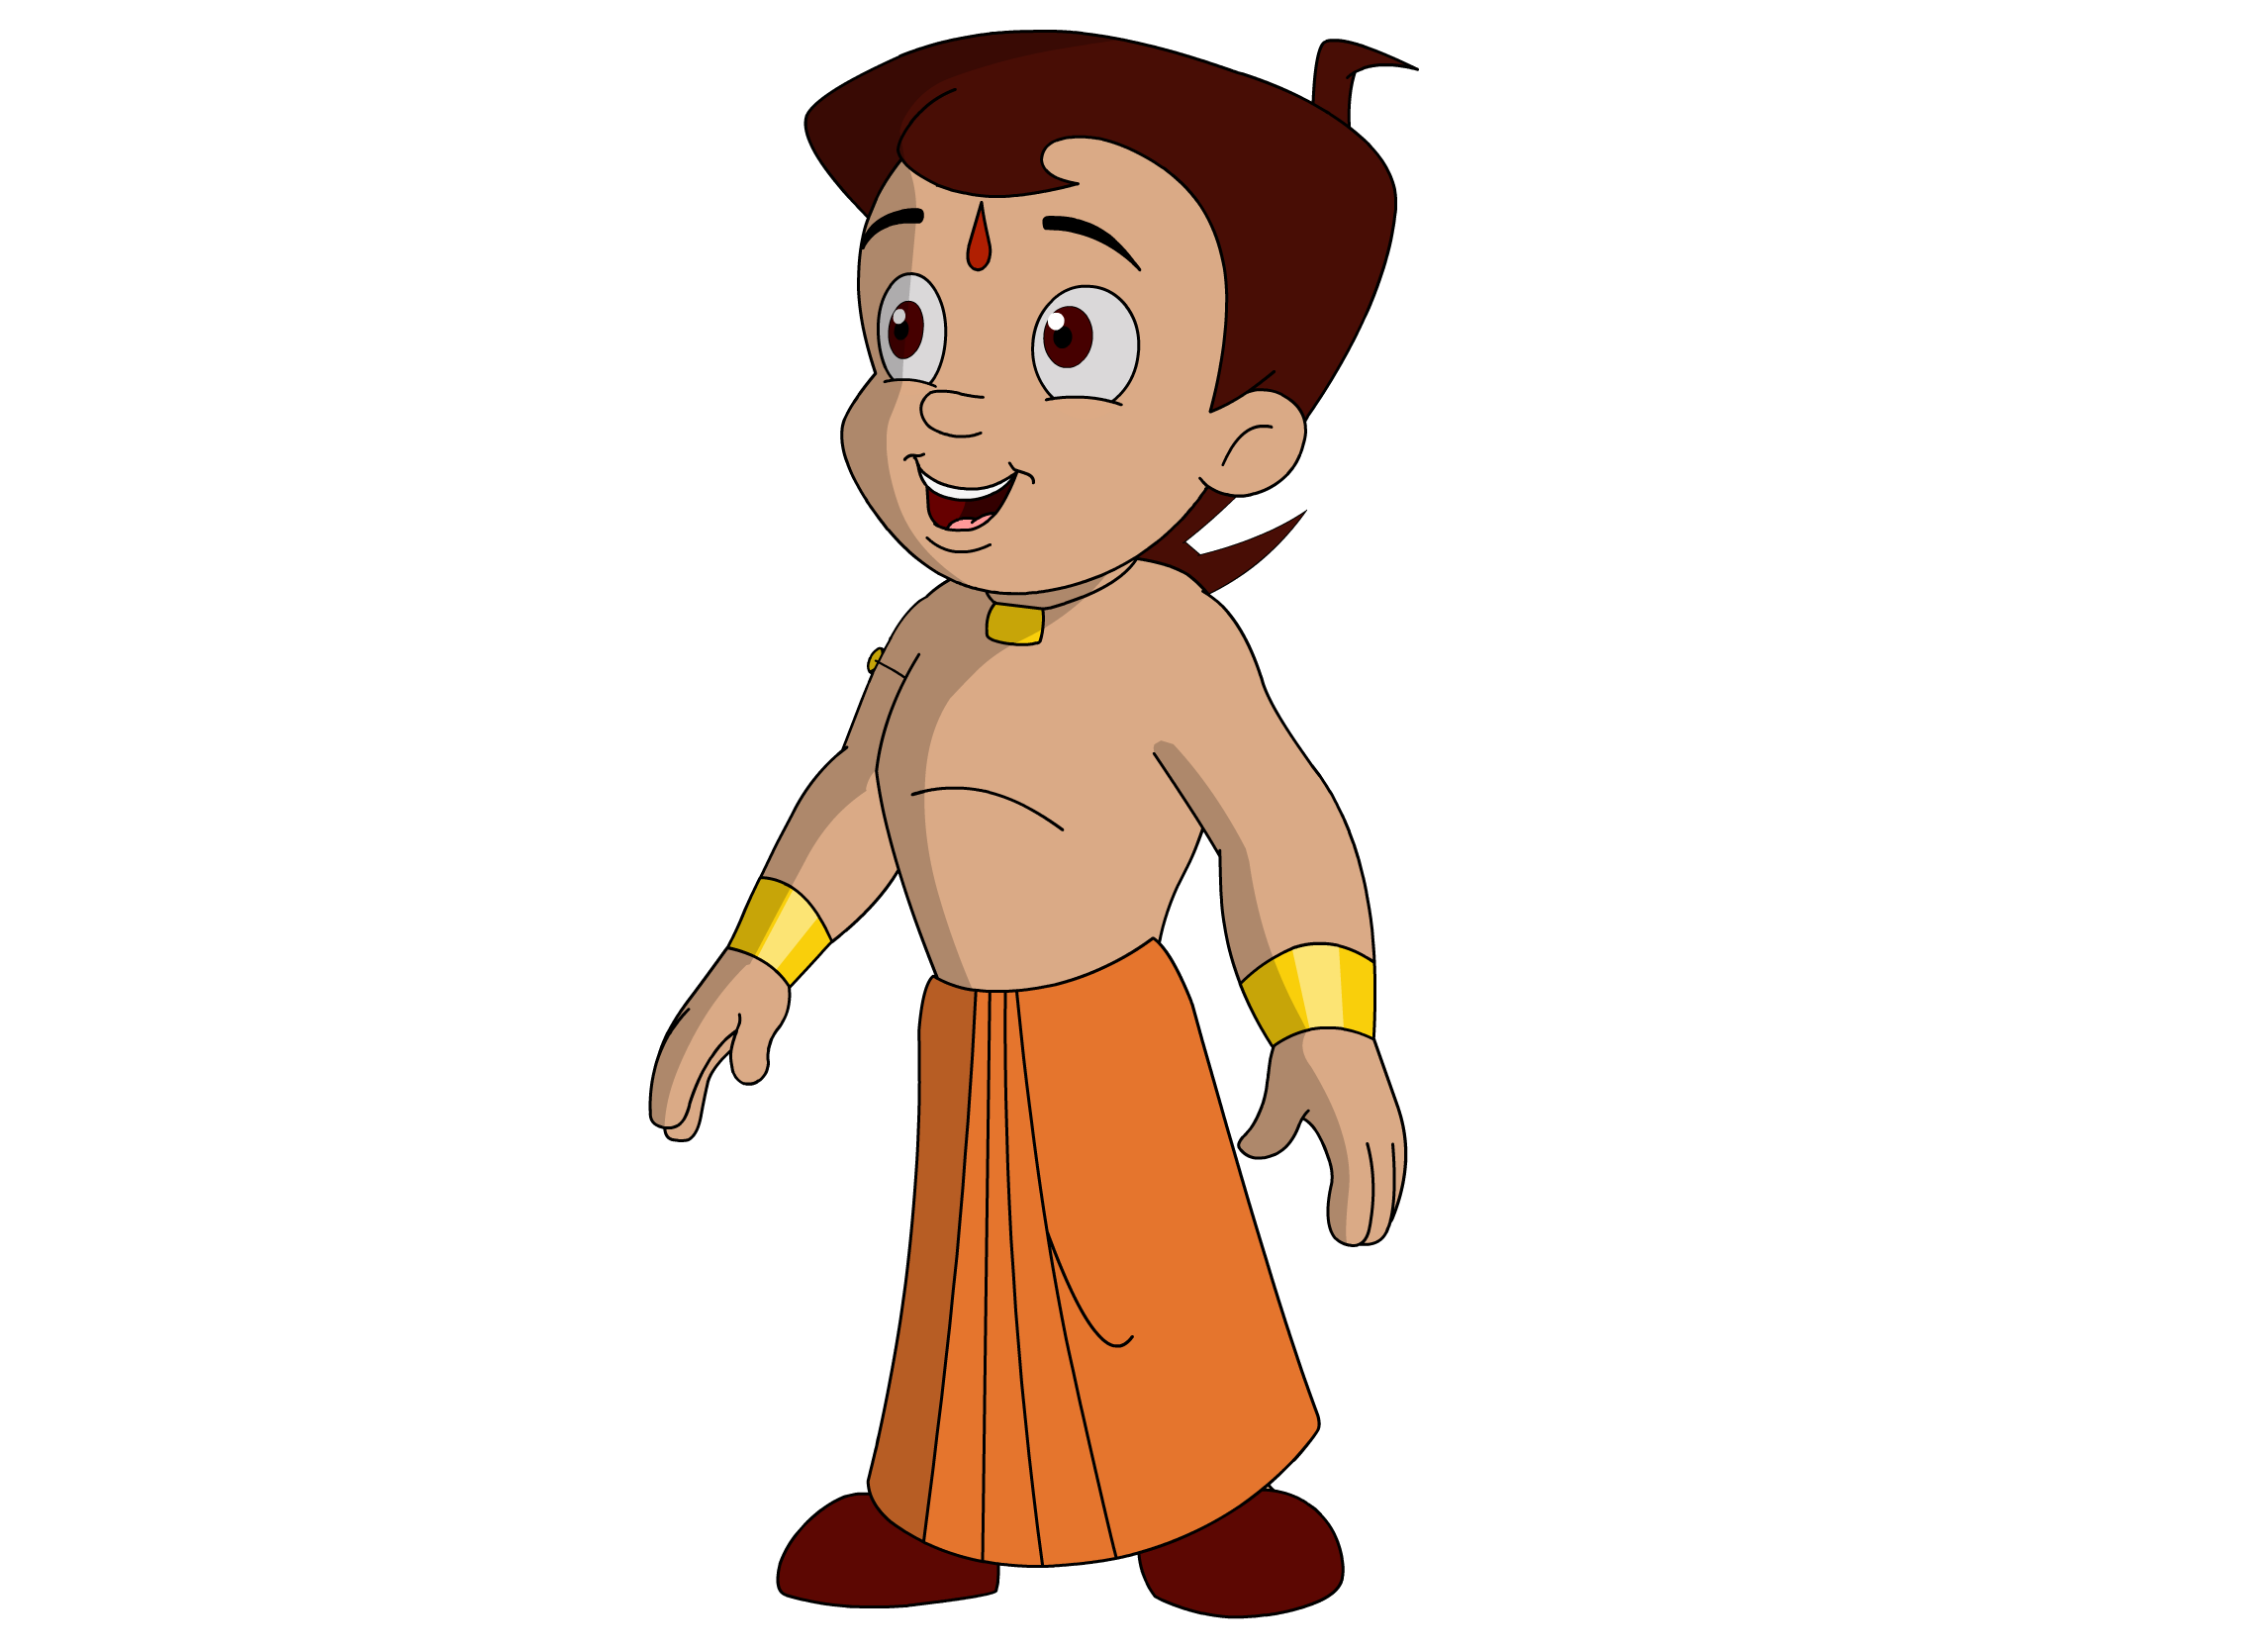 Chhota Bheem coloring page - free printable coloring pages on 